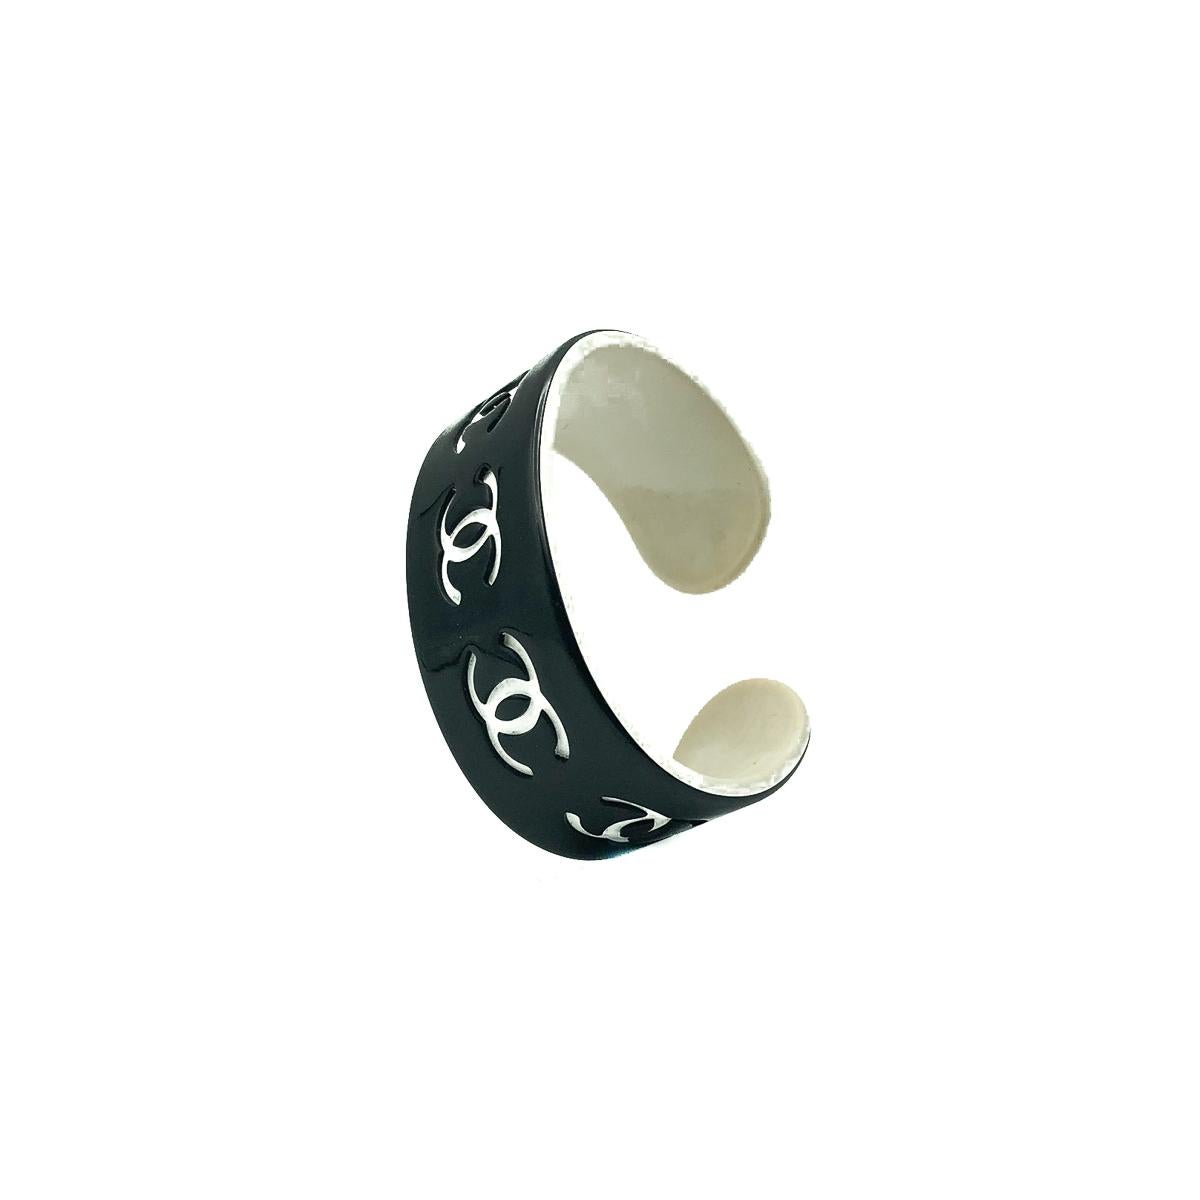 A  Chanel Monochrome Logo Cuff. Featuring an arc style design embellished with the iconic CC logo from end to end. 
Since 1910 when Gabrielle 'Coco' Chanel opened her first boutique, the House of Chanel boasts a heady timeline.  Invest in this